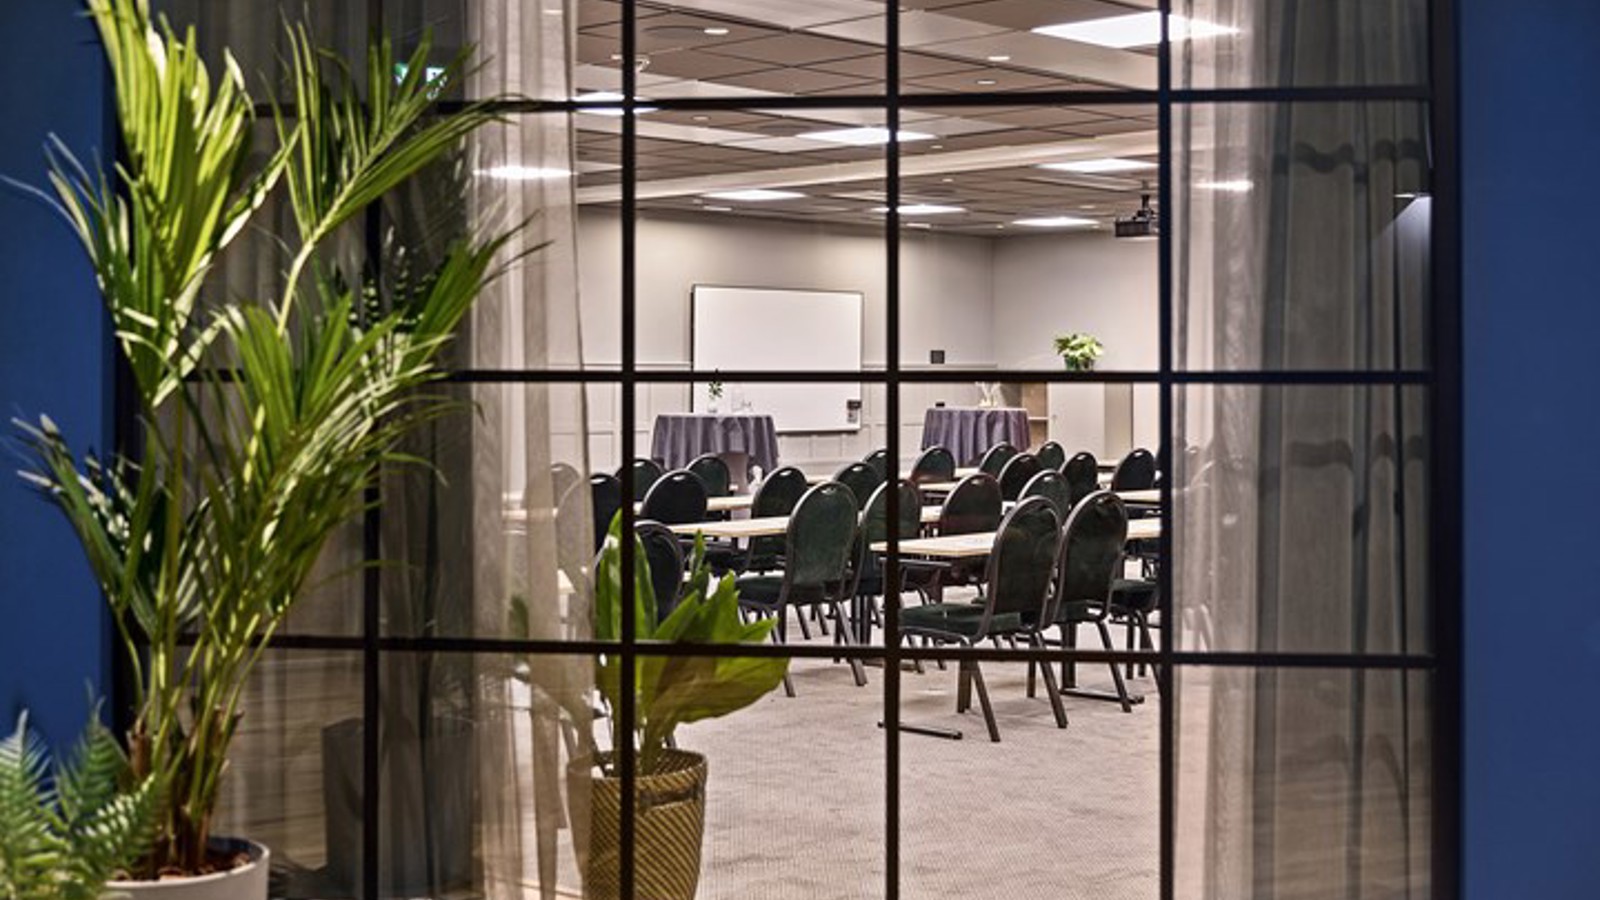 Conference room with chairs photographed through a window